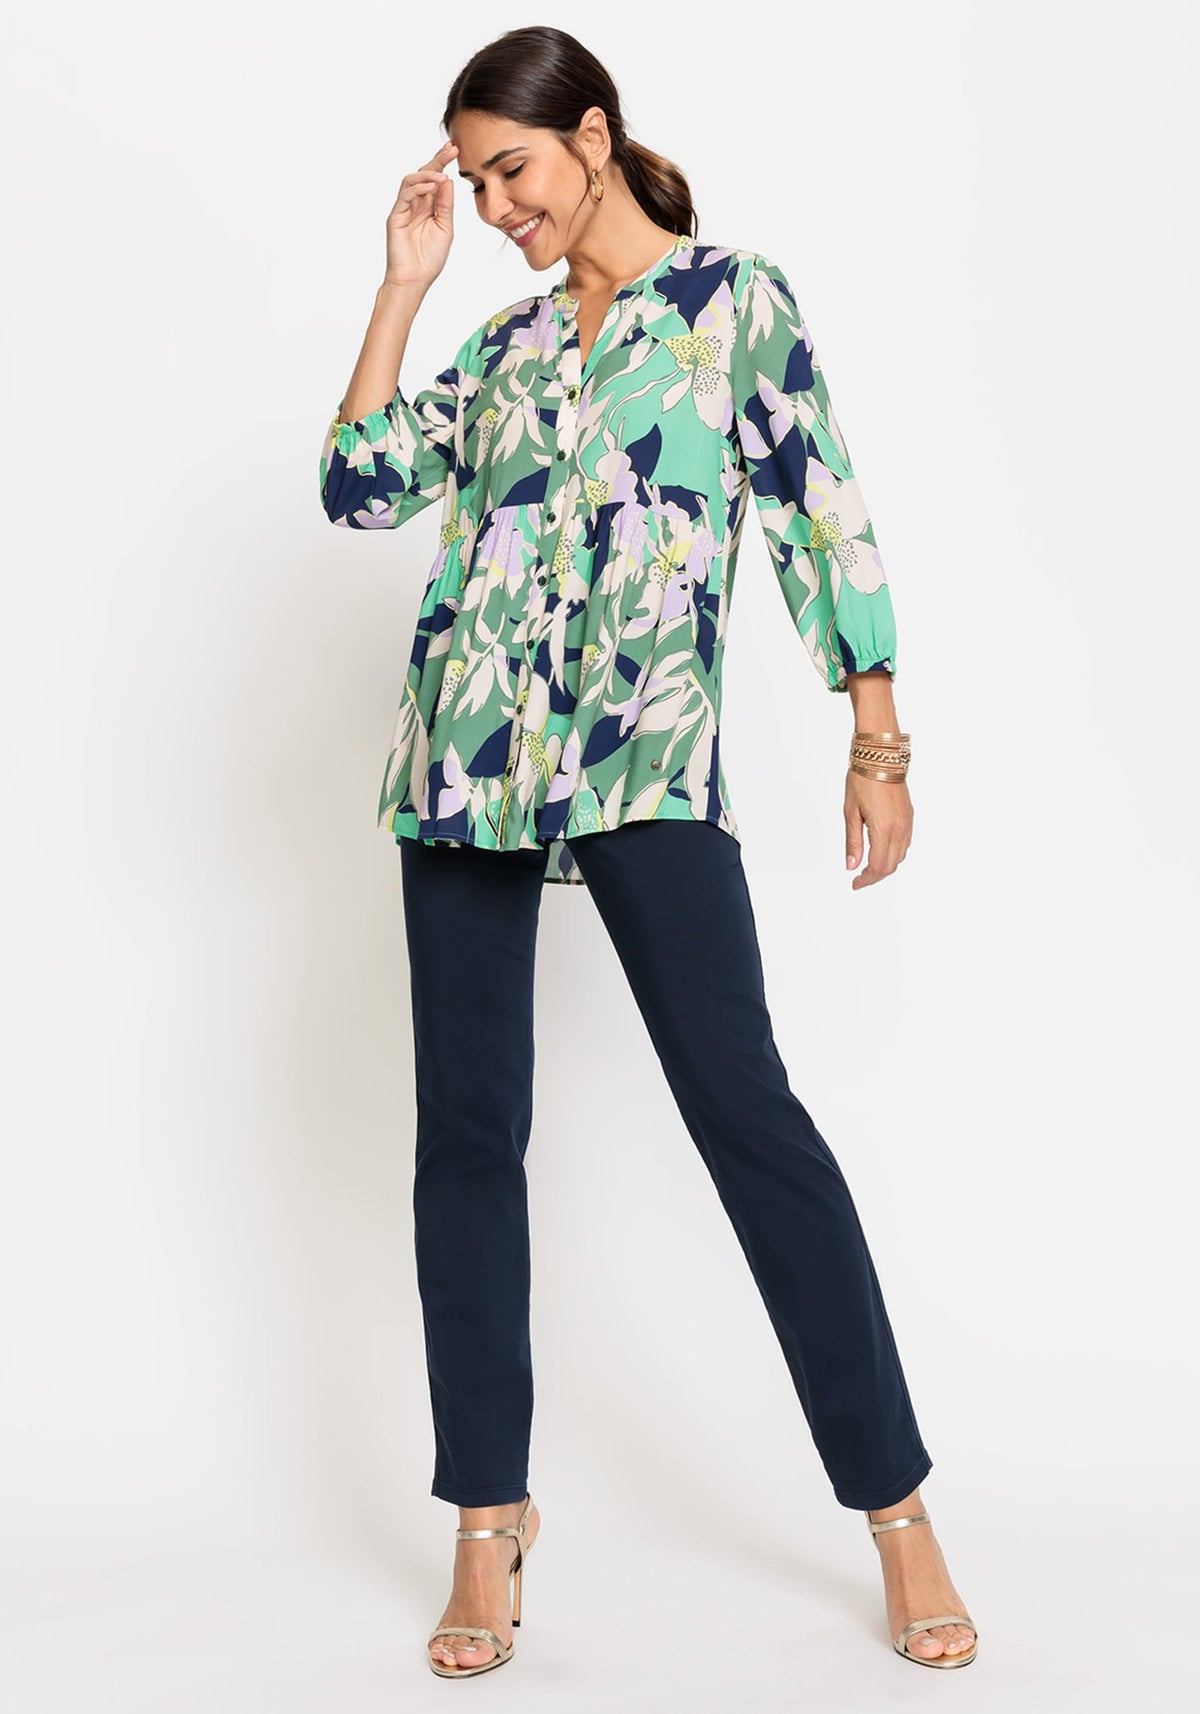 3/4 Sleeve Floral Swing Blouse